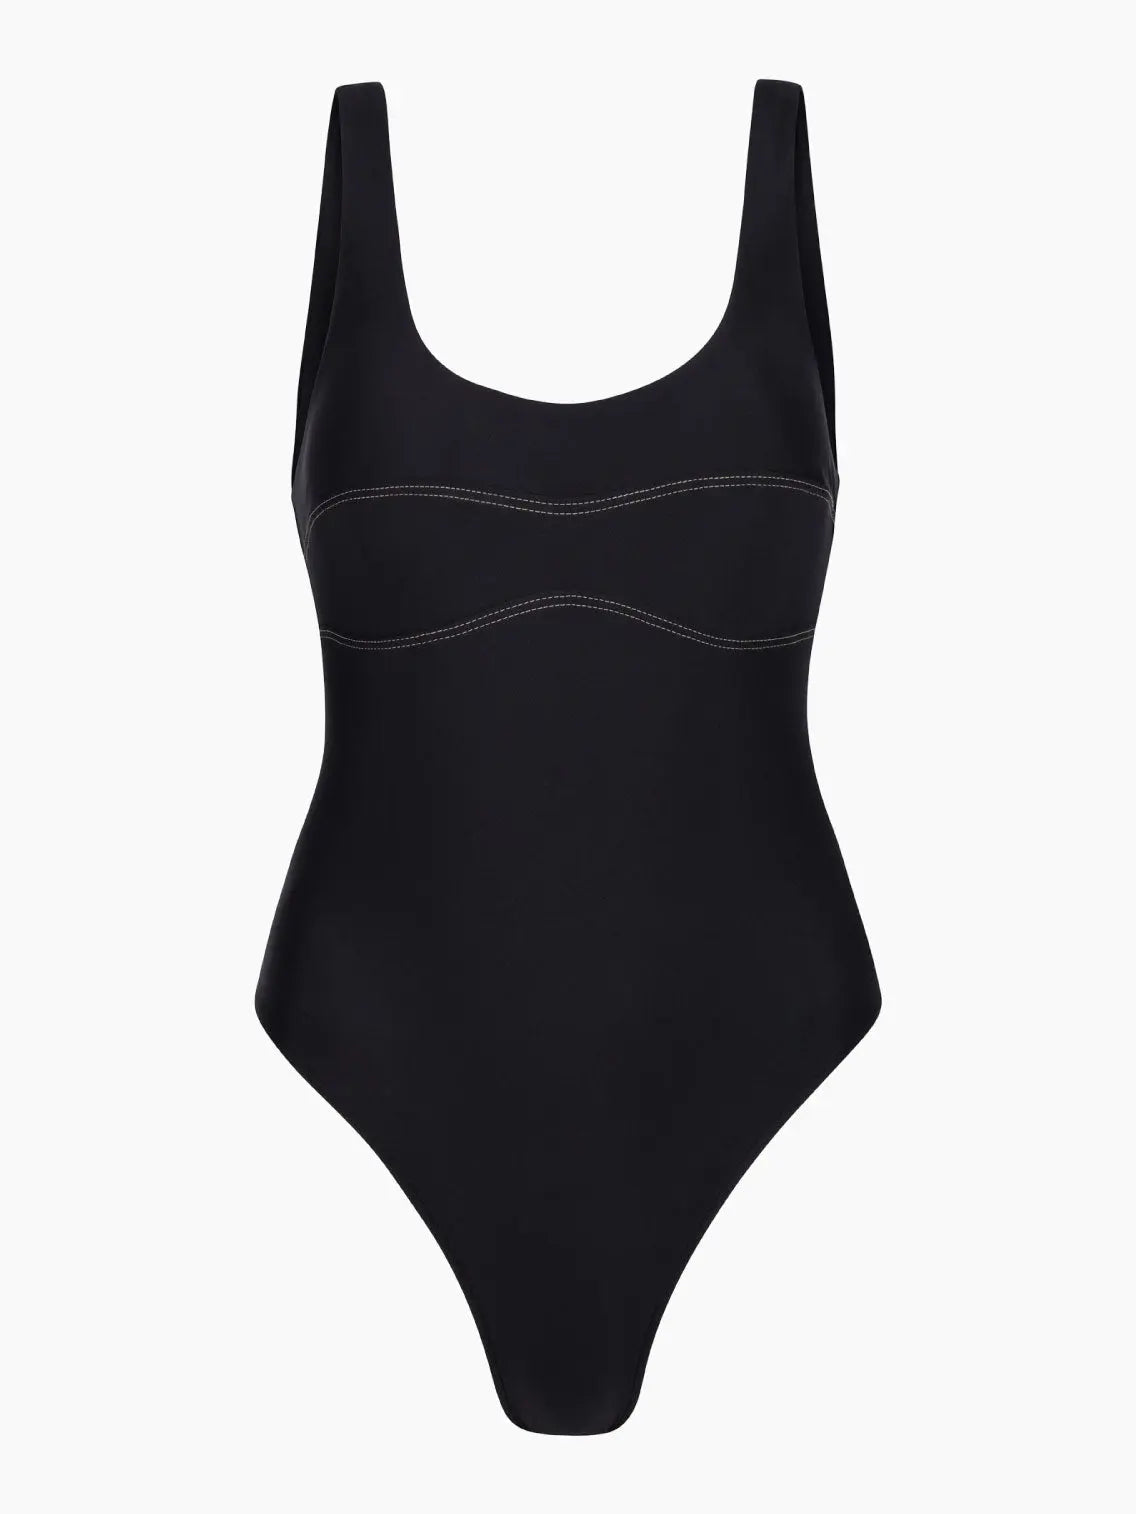 A Black Contrast One Piece Swimwear with wide shoulder straps and a scoop neckline from Innes Lauren in Barcelona. The swimsuit features simple, clean lines and a fitted design, with subtle horizontal stitching detail across the chest area. The fabric appears smooth and stretchy.